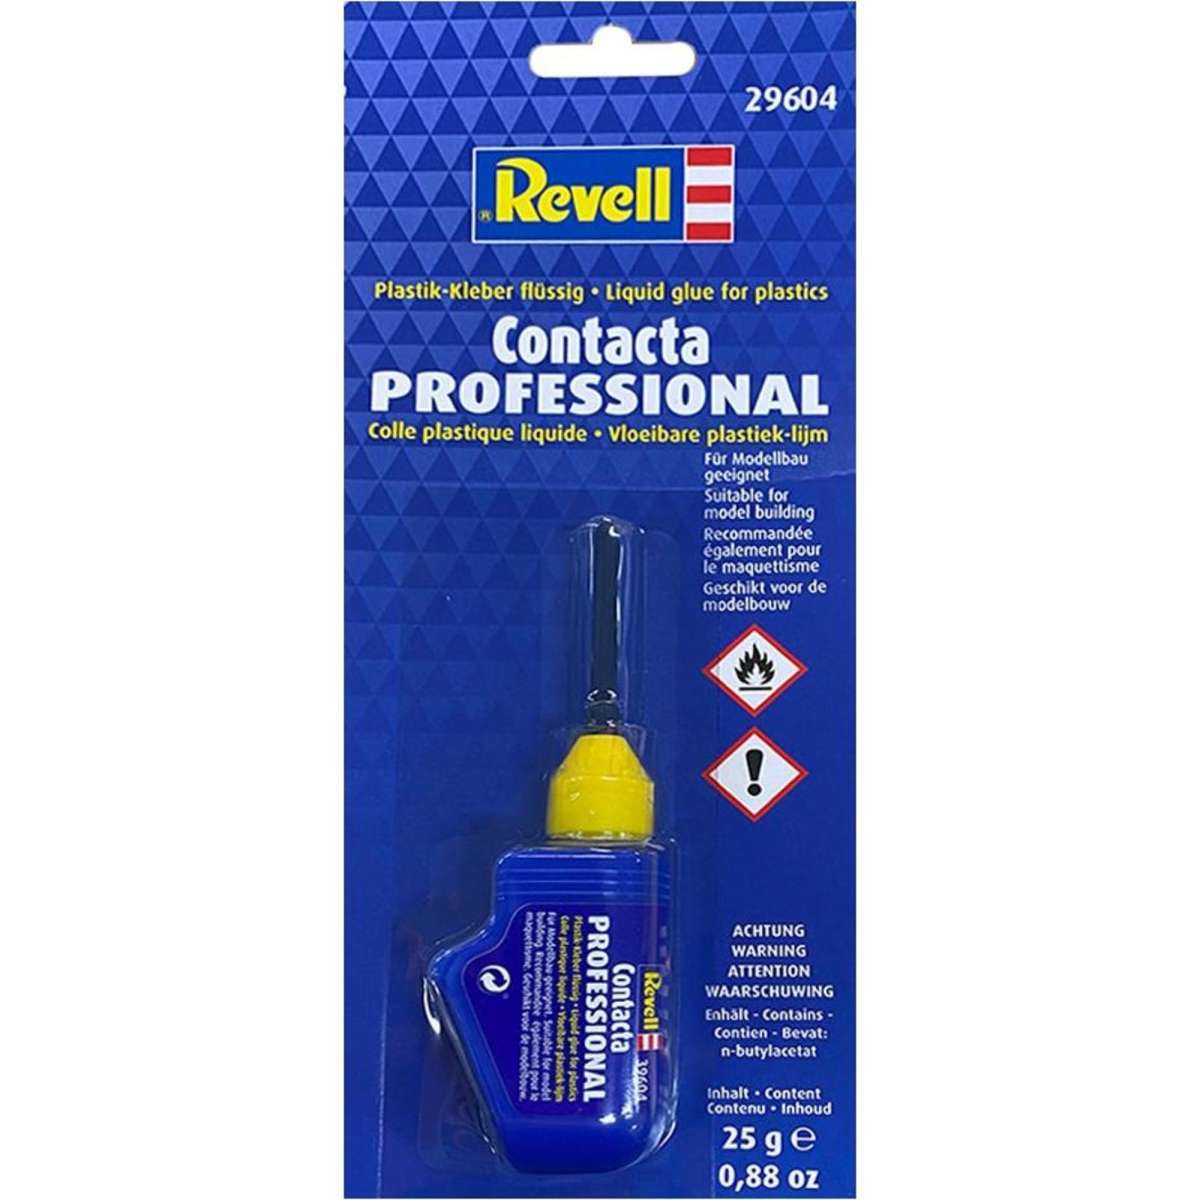 Contacta Professional - 1 x 25gr. Glue manufactured by Revell (ref.  REV39604, also 42018803 and 39604)